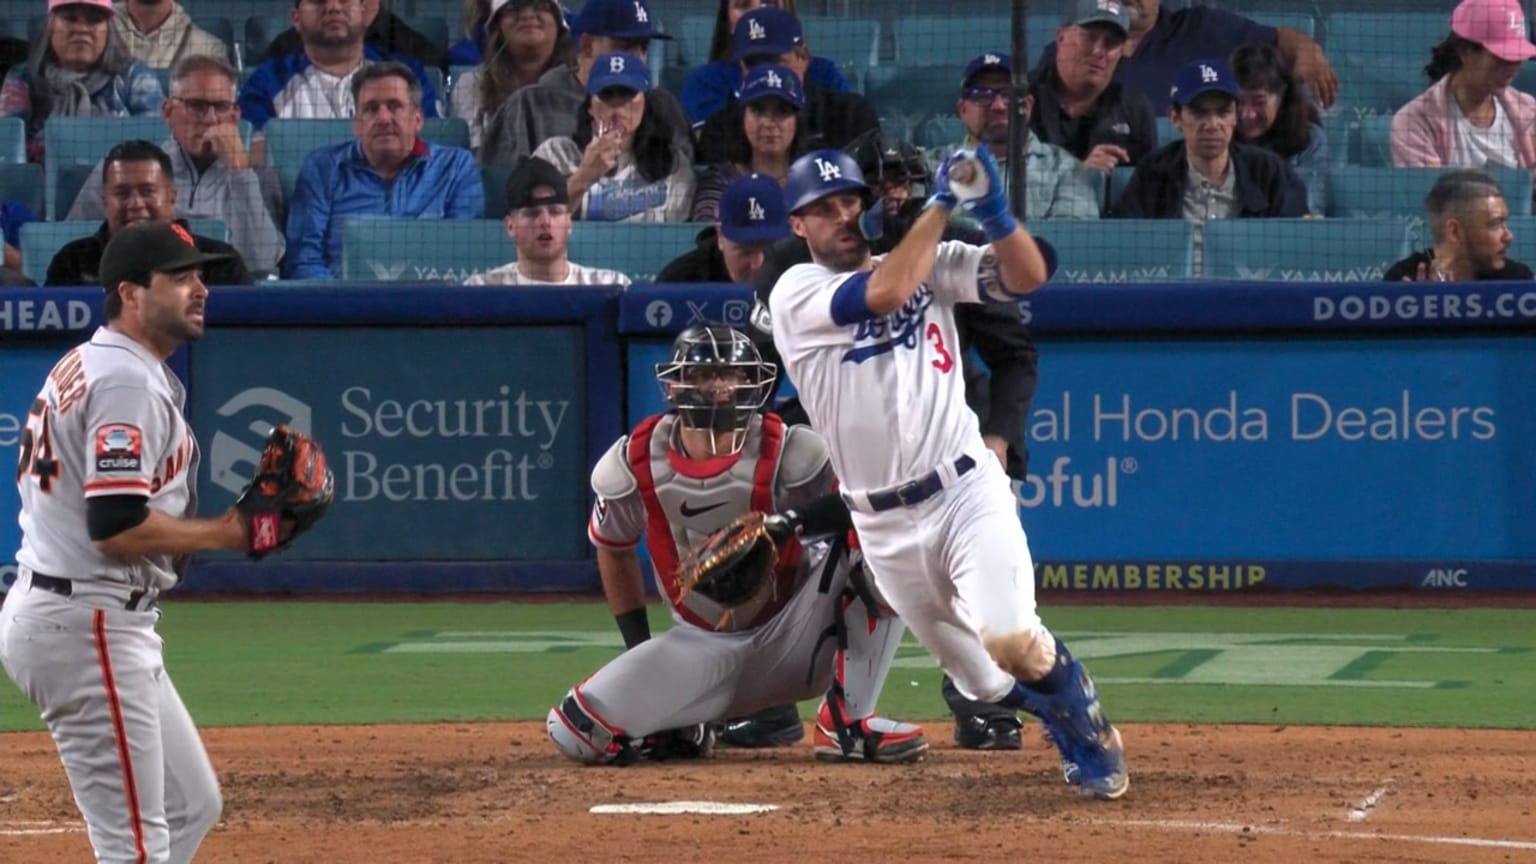 Chris Taylor's defense, RBI single in 10th lifts Dodgers to 3-2